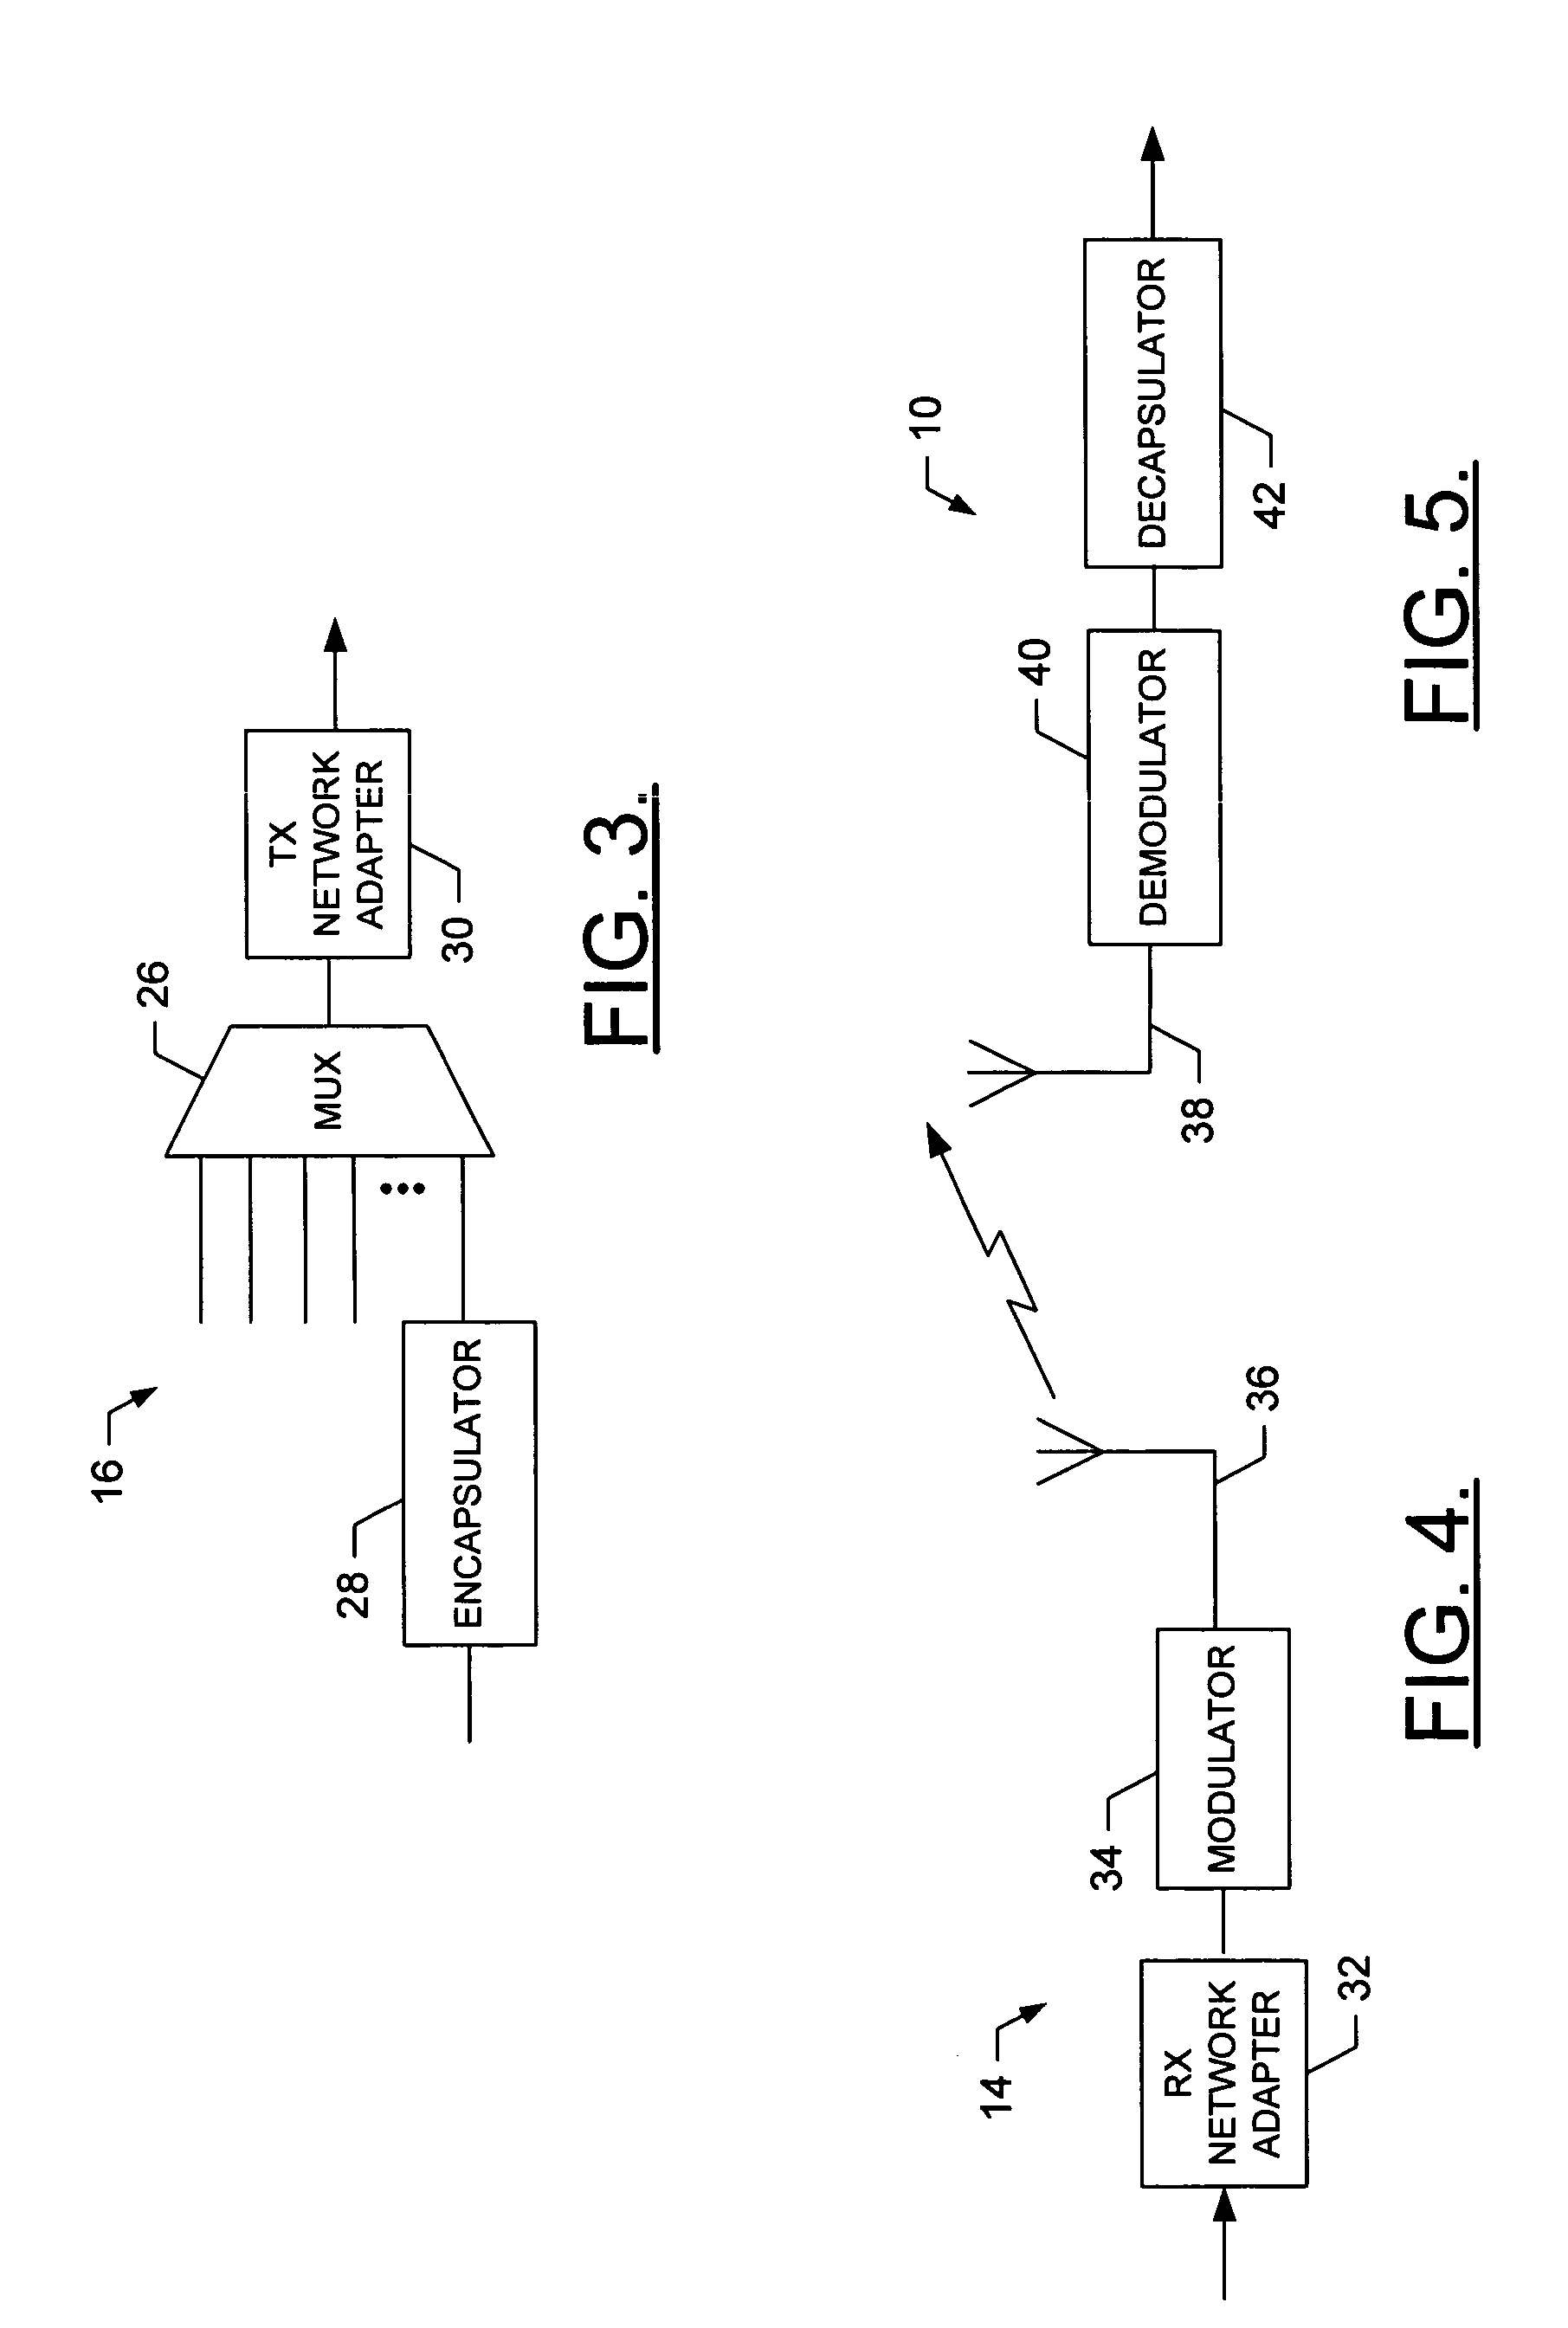 Encapsulator and an associated method and computer program product for encapsulating data packets